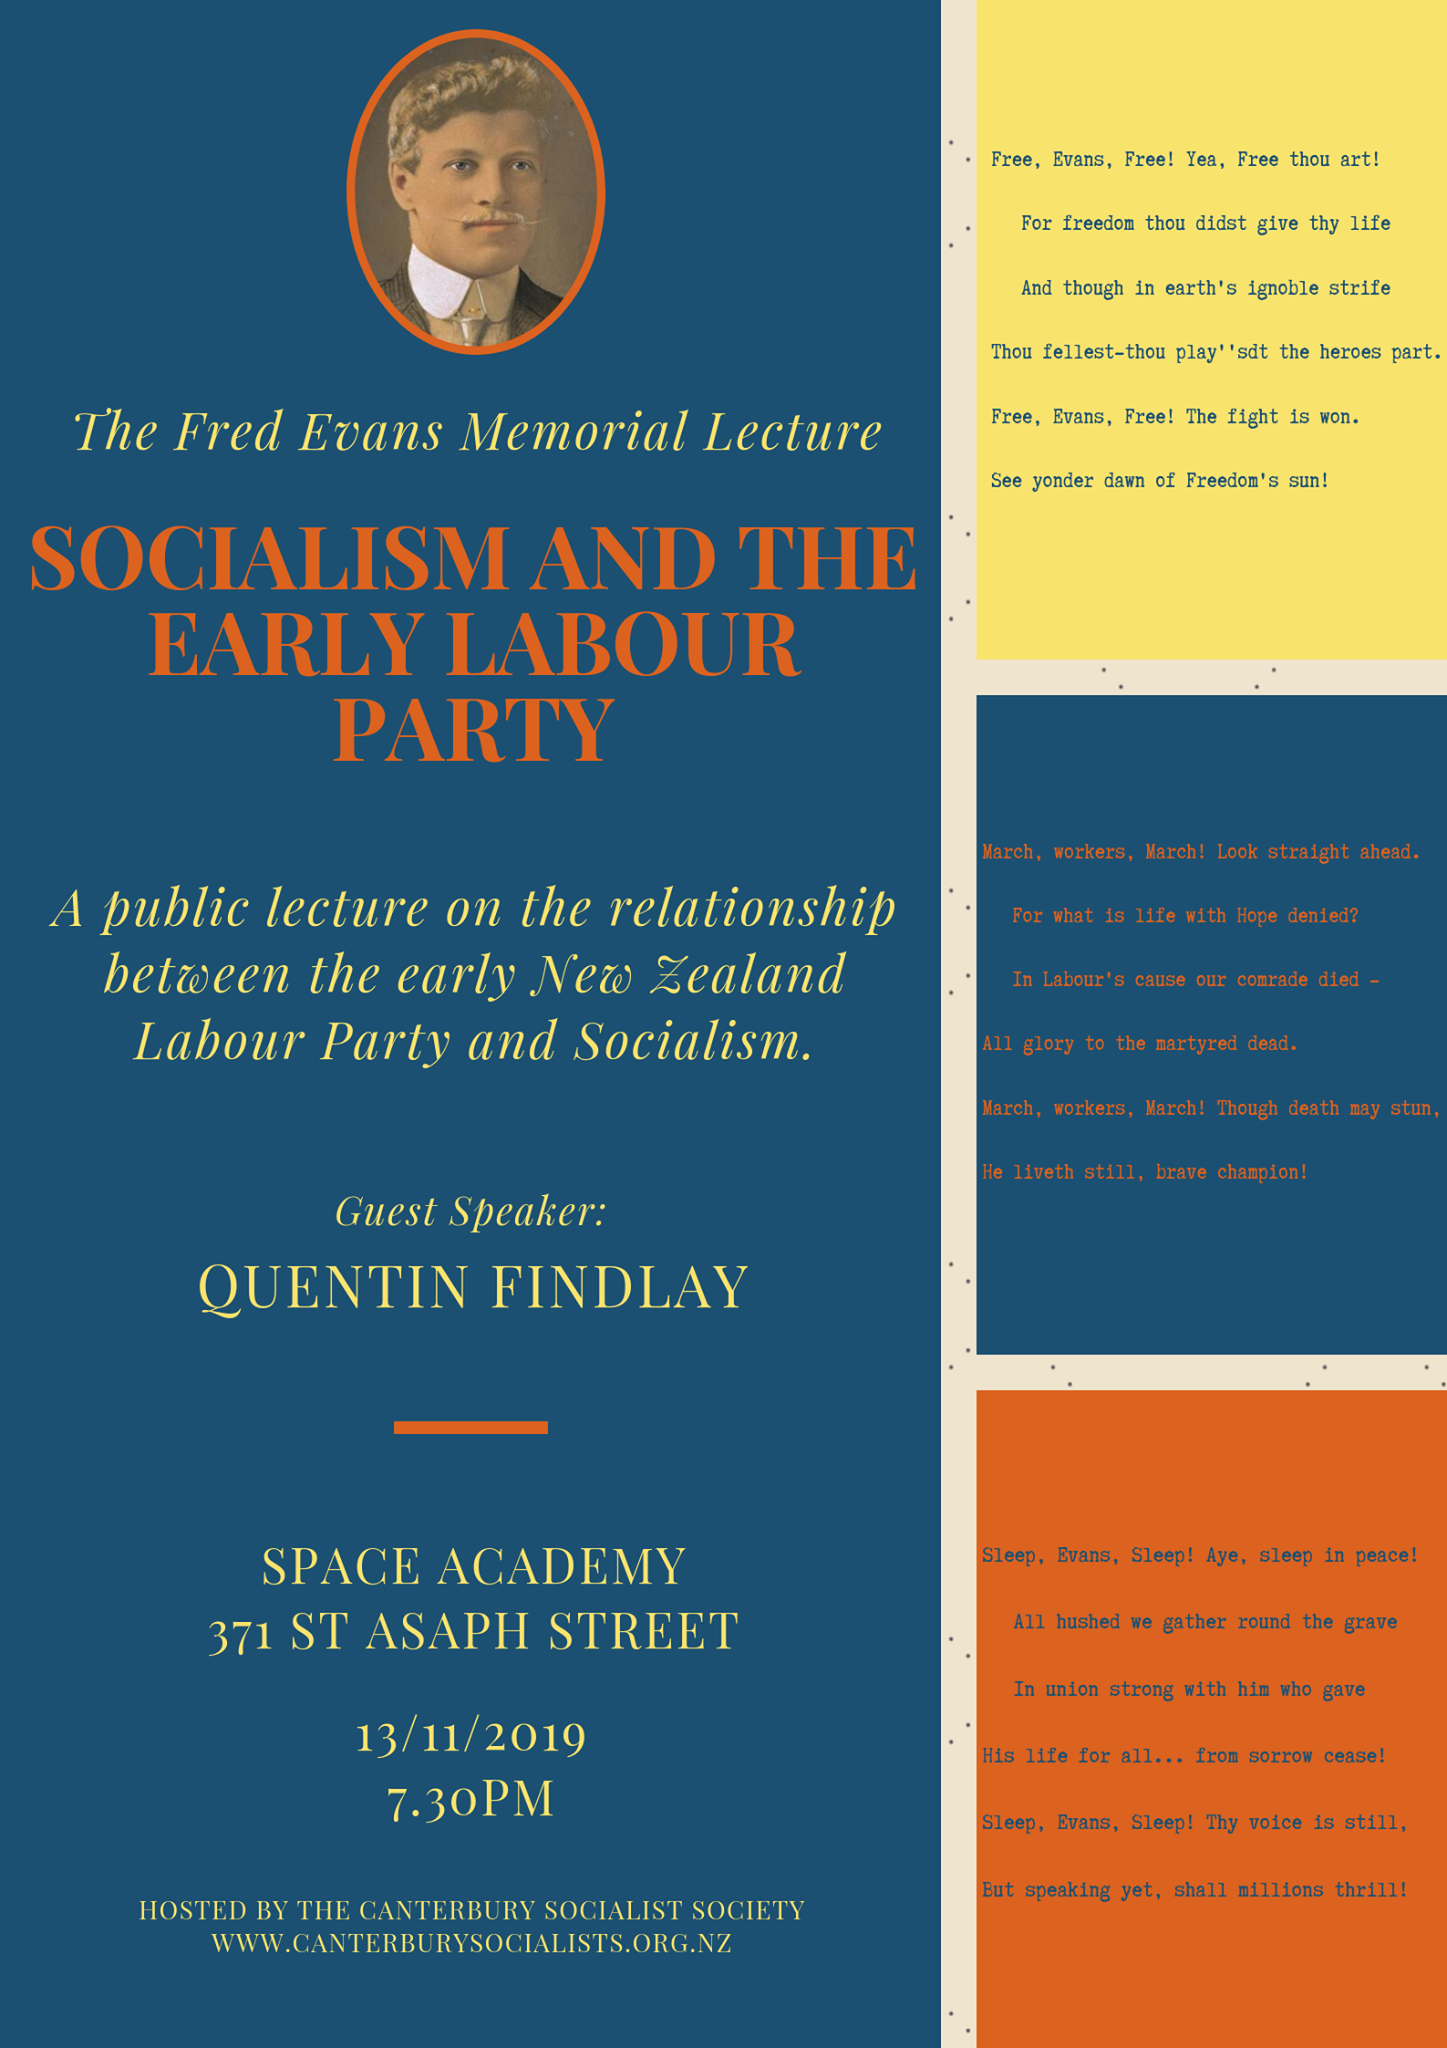 Fred Evans Memorial Lecture: Socialism & the Early Labour Party